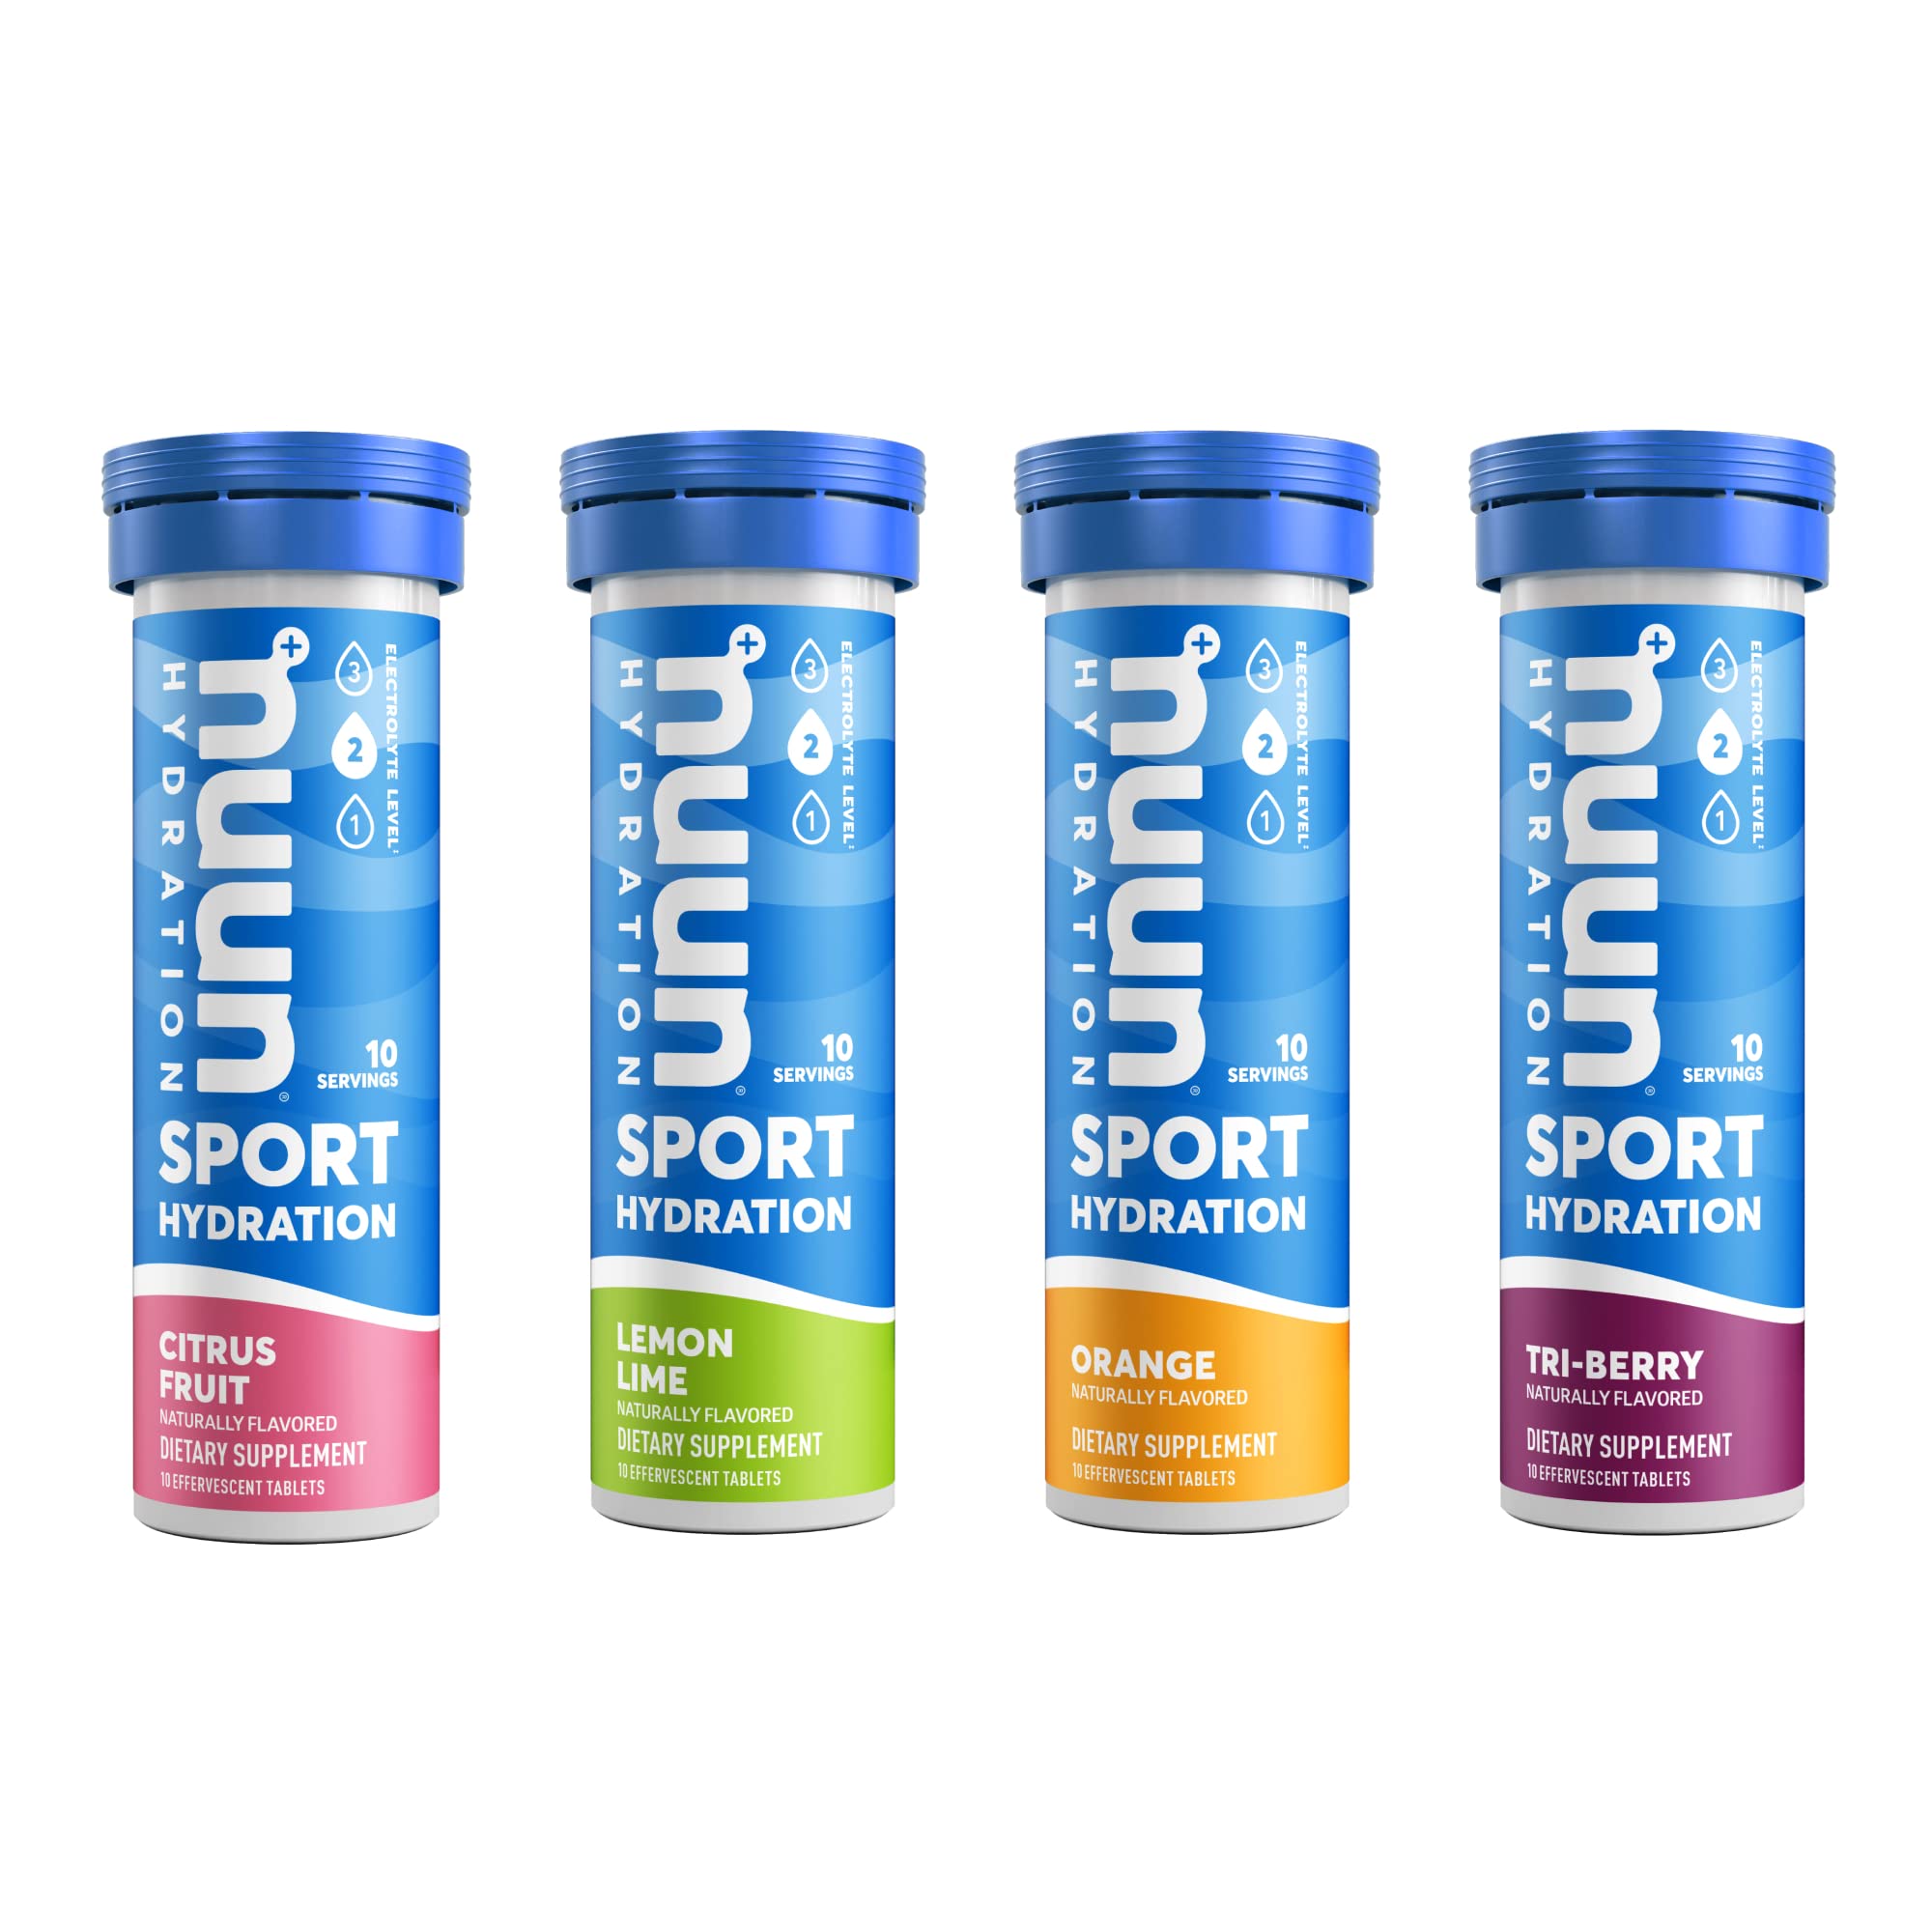 Nuun Sport Electrolyte Tablets for Proactive Hydration, Mixed Citrus Berry Flavors, 4 Pack (40 Servings)